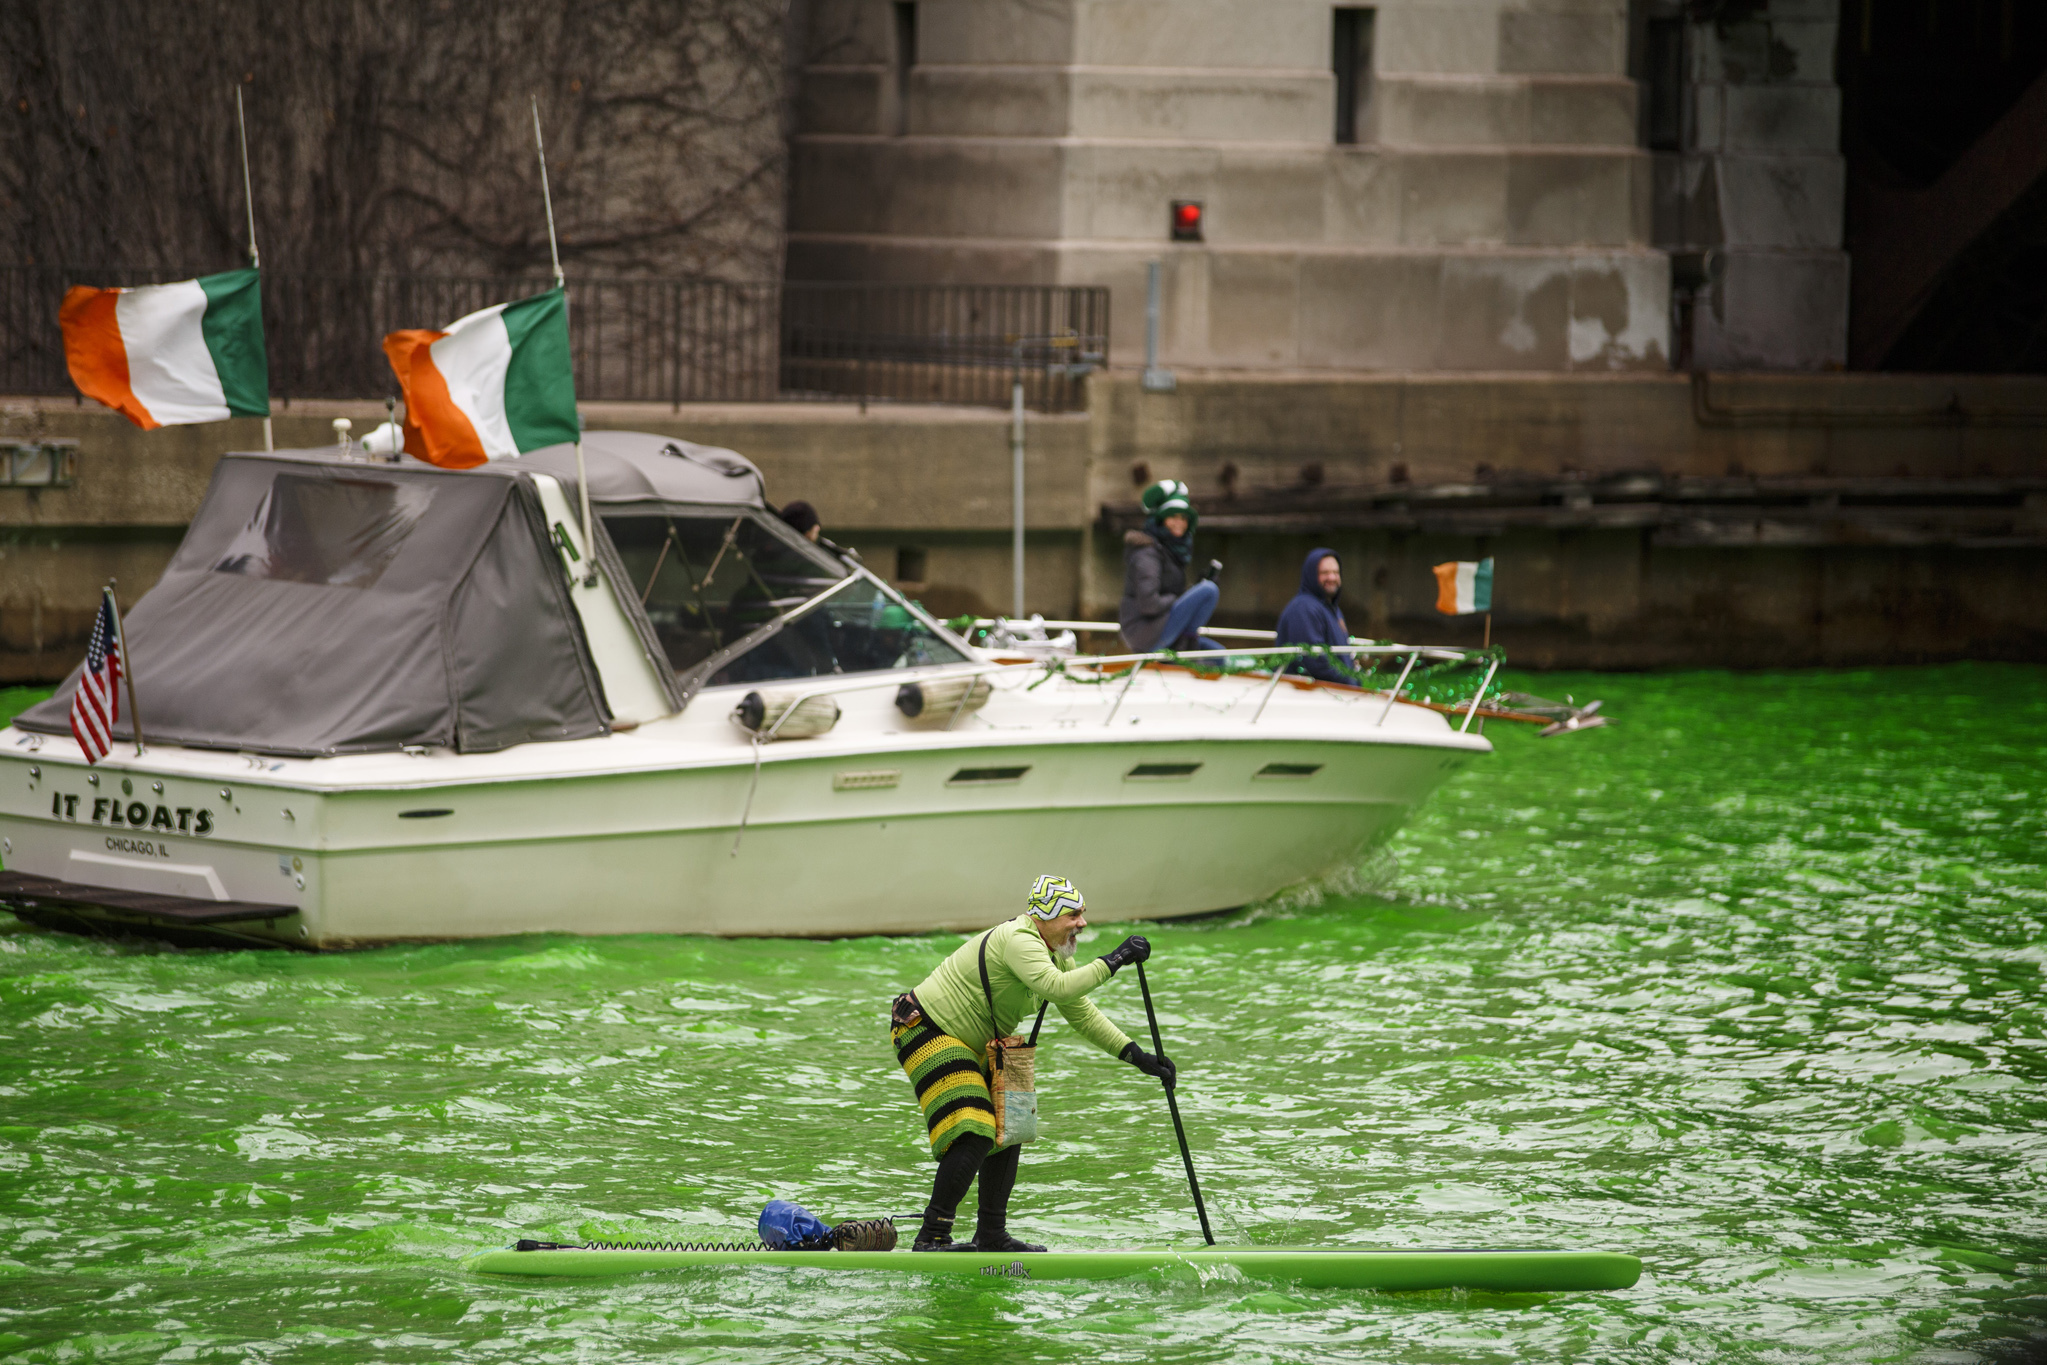 LISTEN: Partnership between plumbers union, boat tour turns Chicago River  green for St. Patrick's Day - Medill Reports Chicago